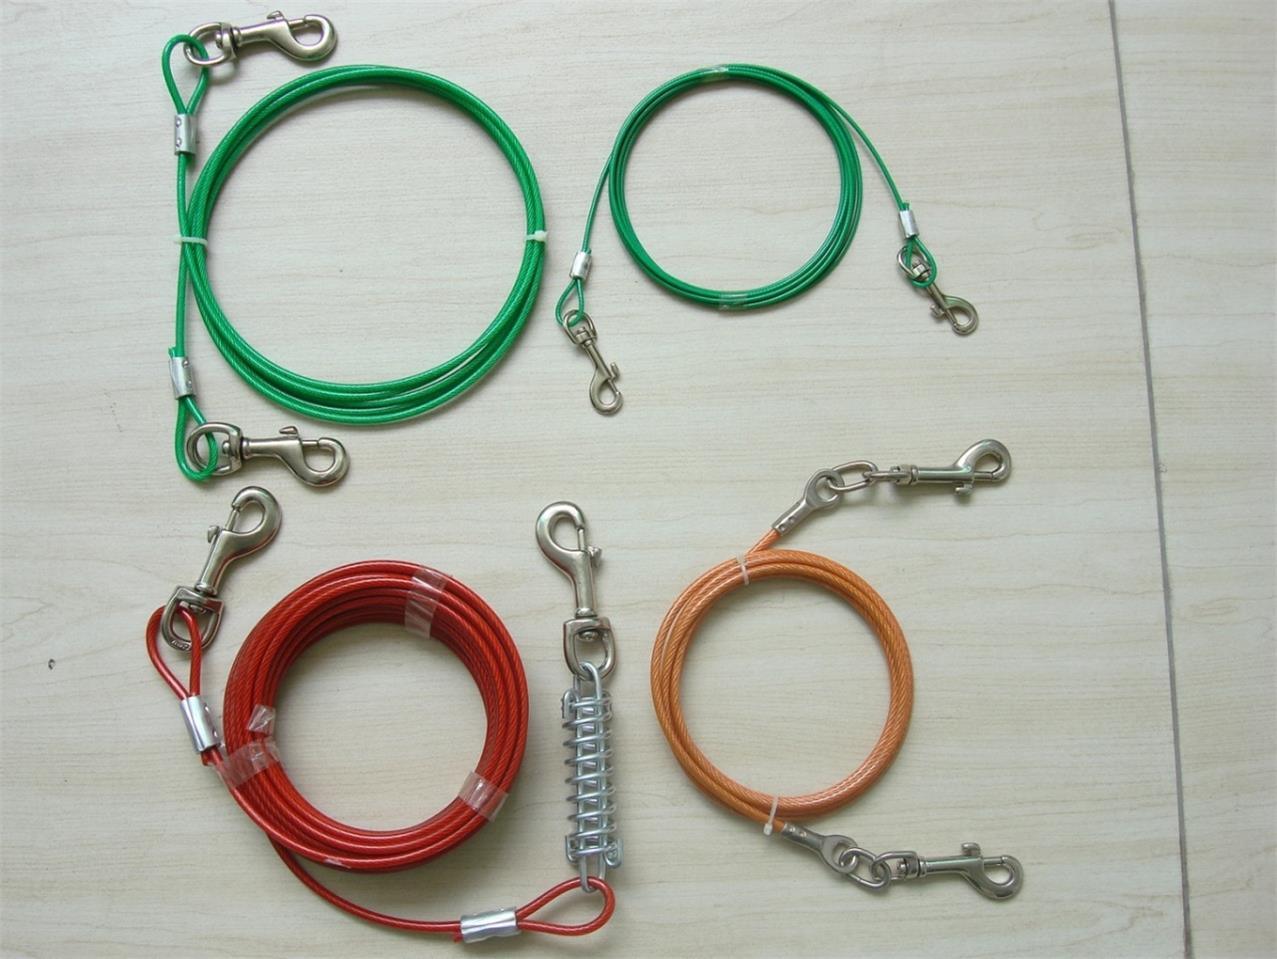 Plastic - Coated Stainless Steel Wire Rope with Clips (GS-51)